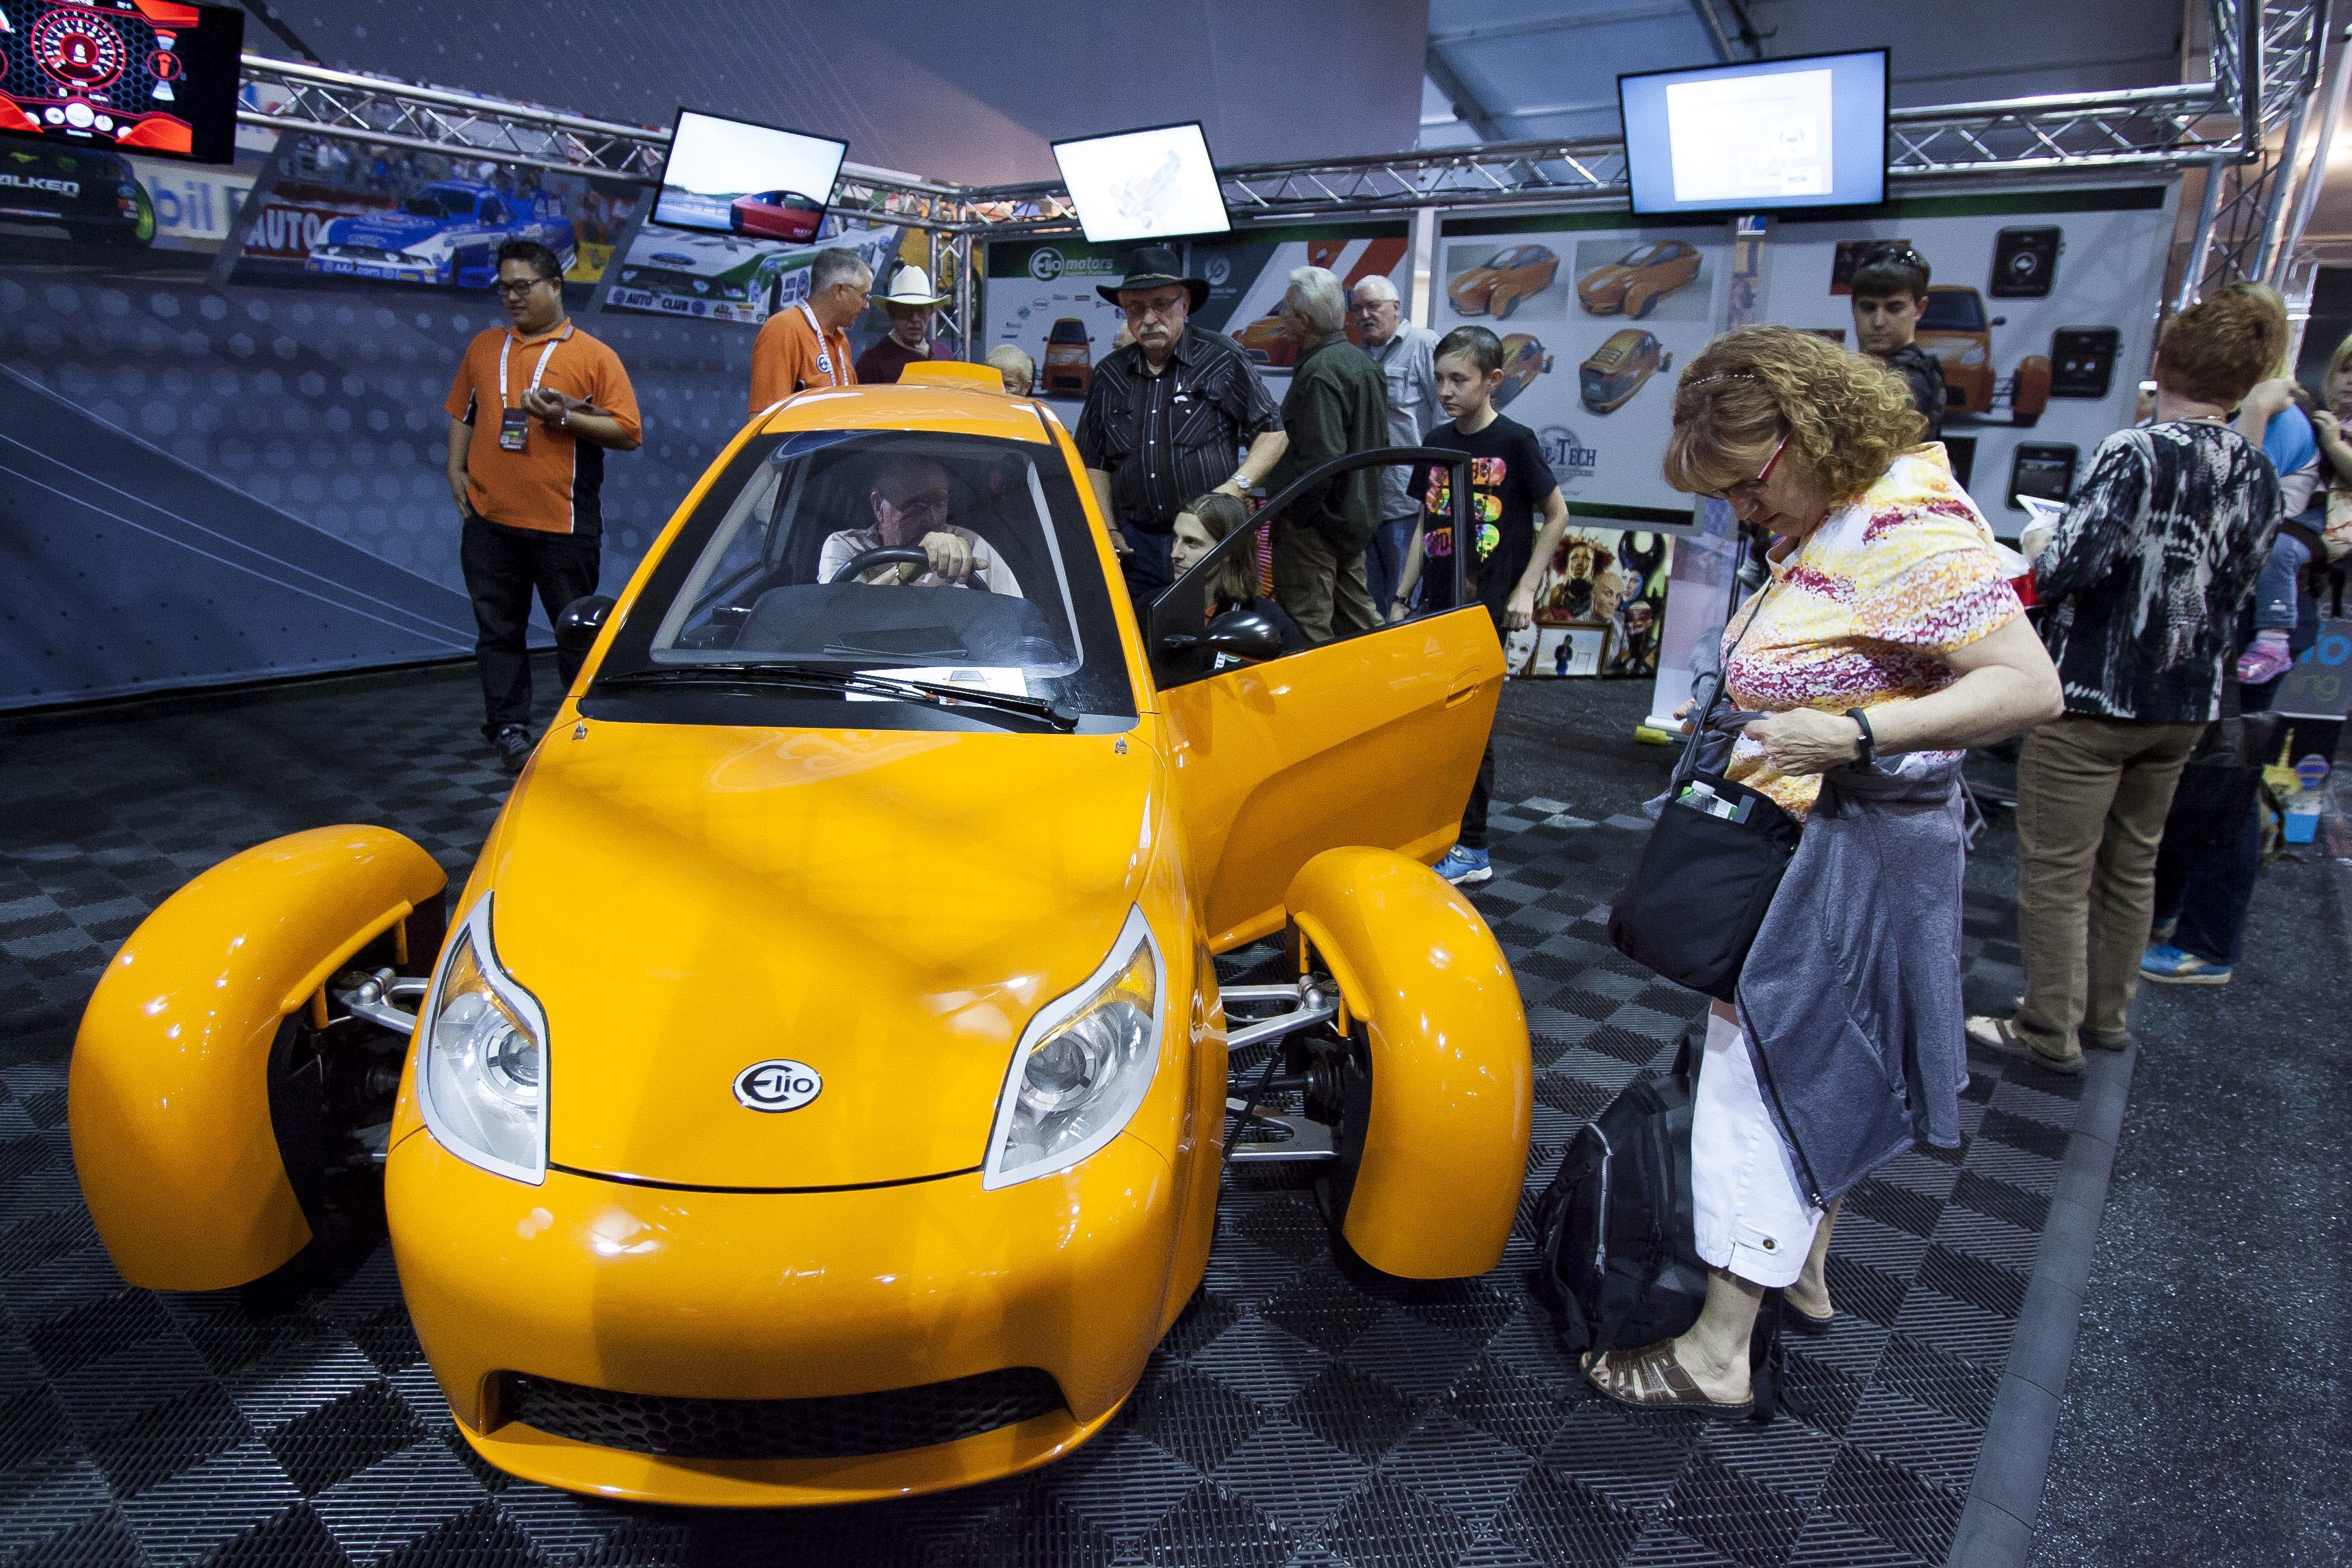 Spectators take turns sitting in an Elio prototype vehicle on the opening day of the Barrett-Jackson Collector Car Auction on Jan. 10, 2015, at Westworld of Scottsdale in Scottsdale, Ariz.